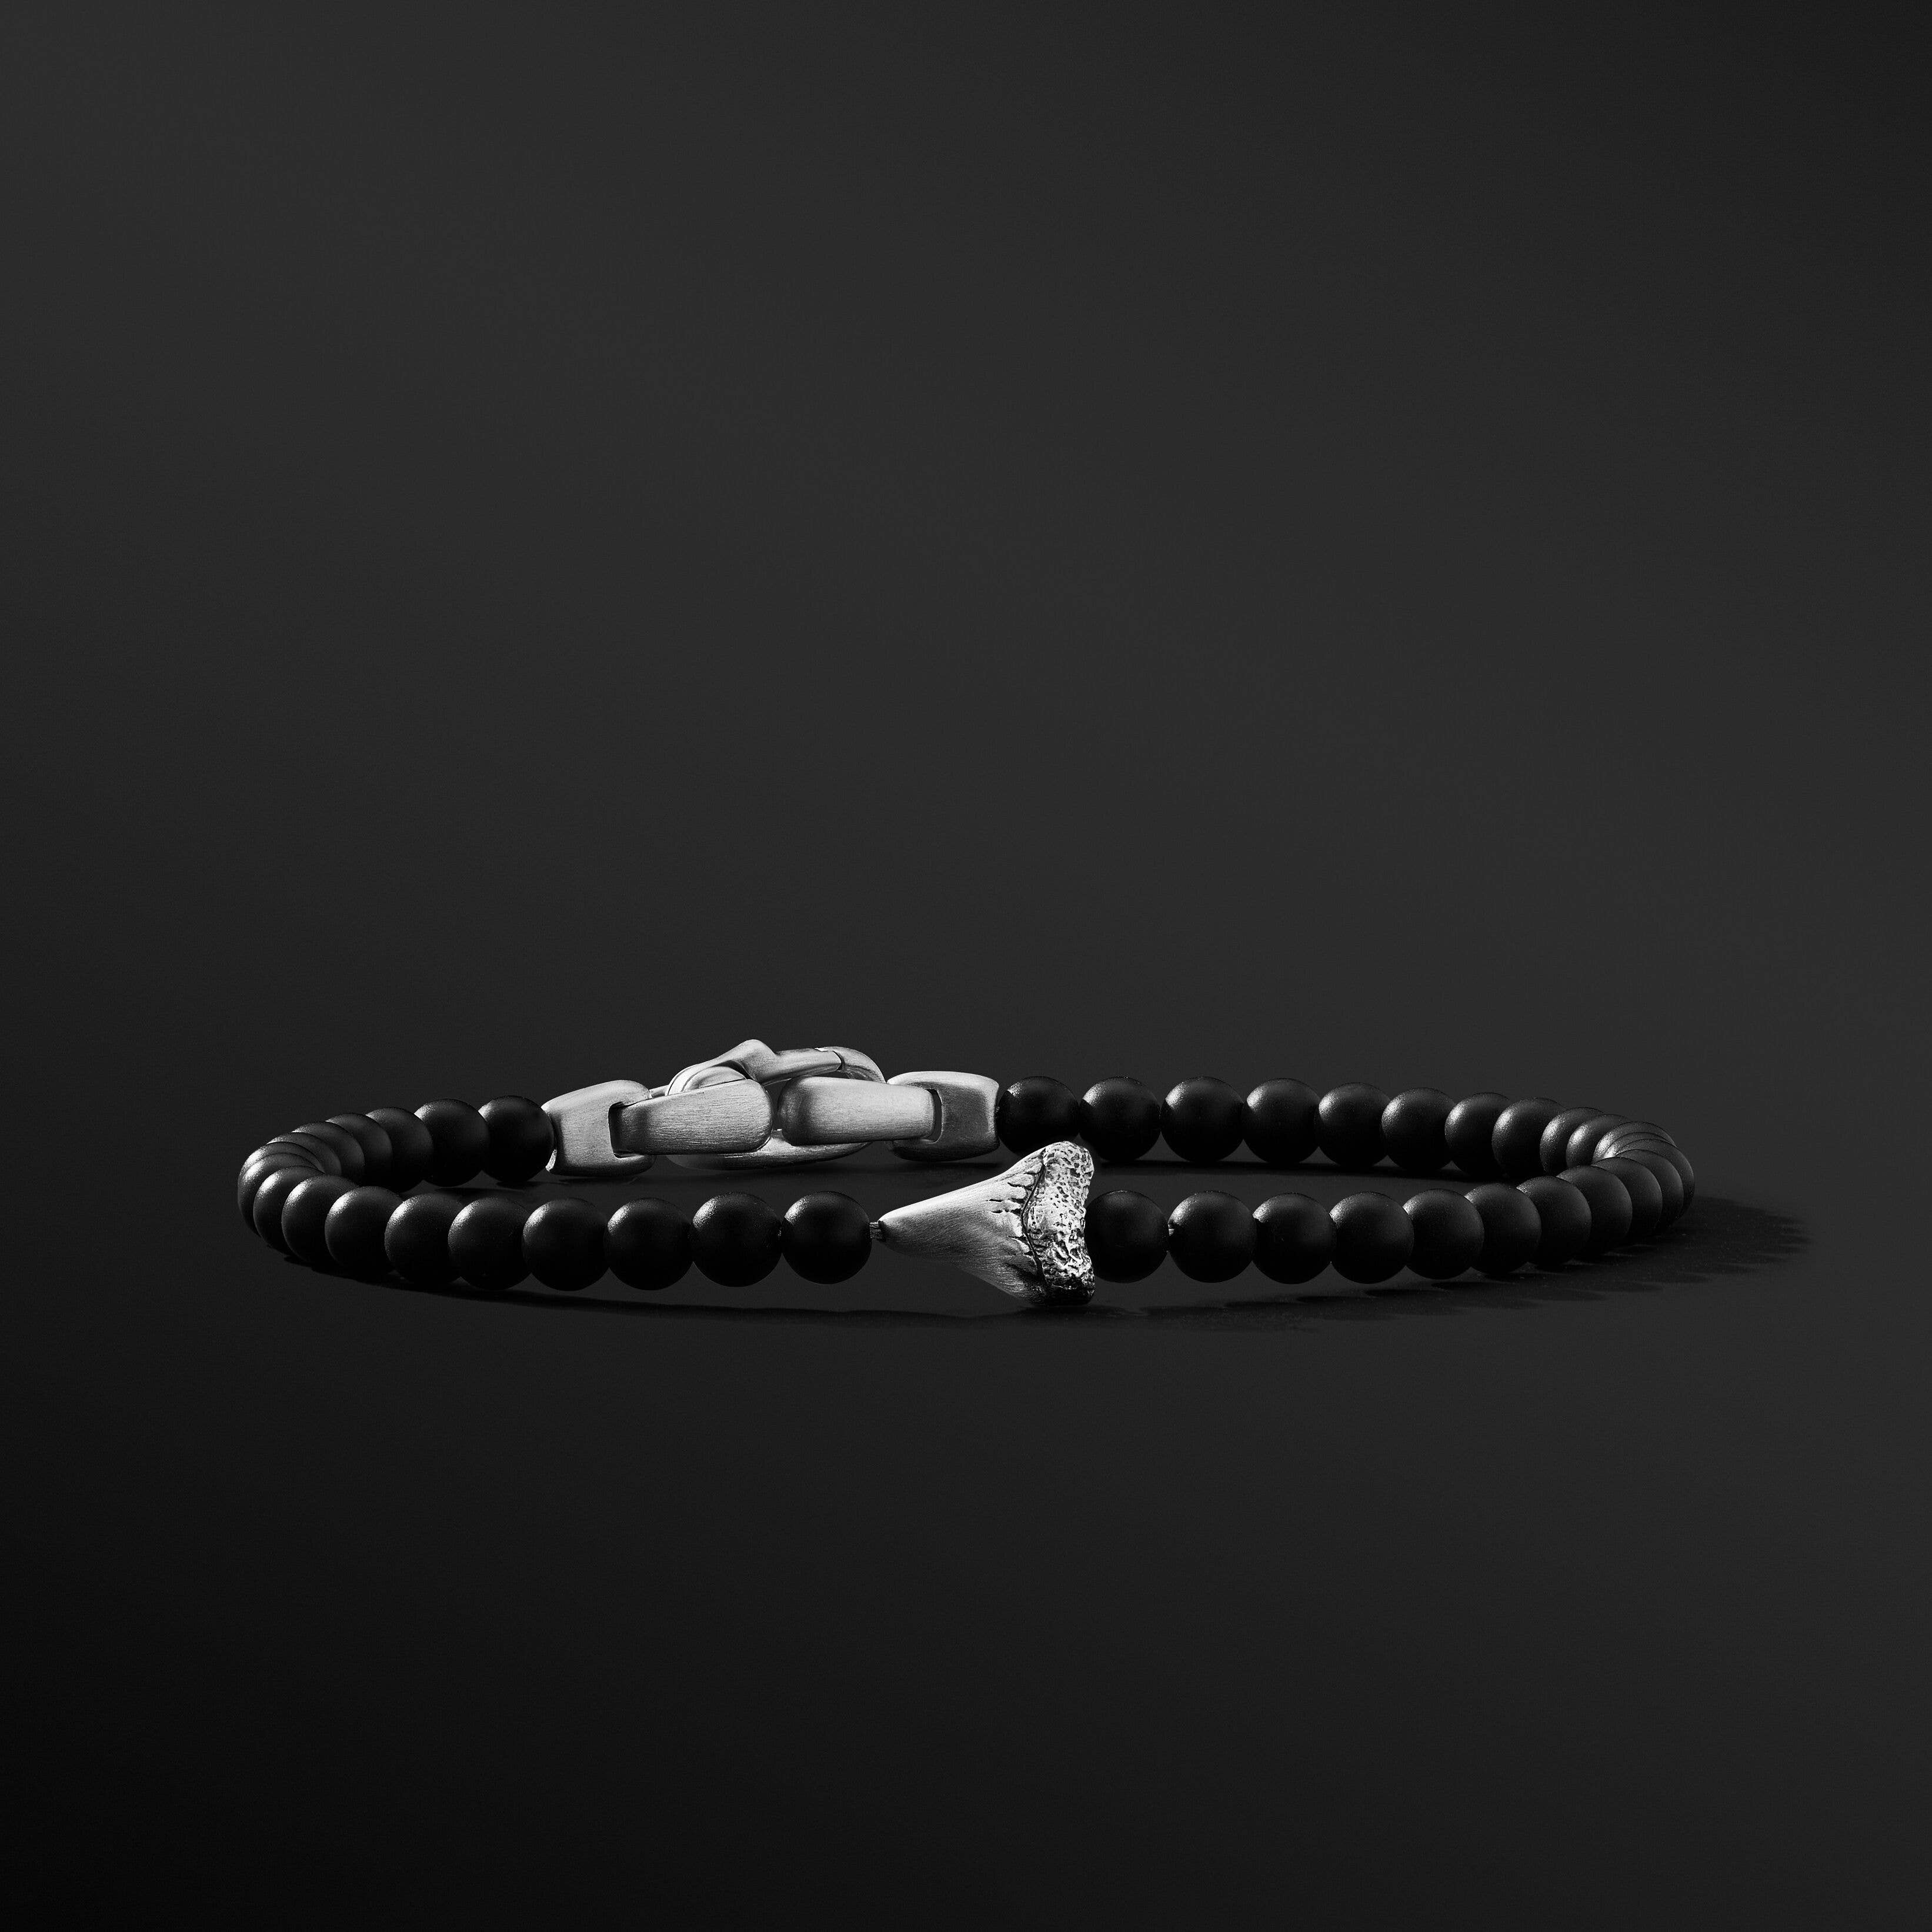 Spiritual Beads Shark Tooth Bracelet in Sterling Silver with Black Onyx